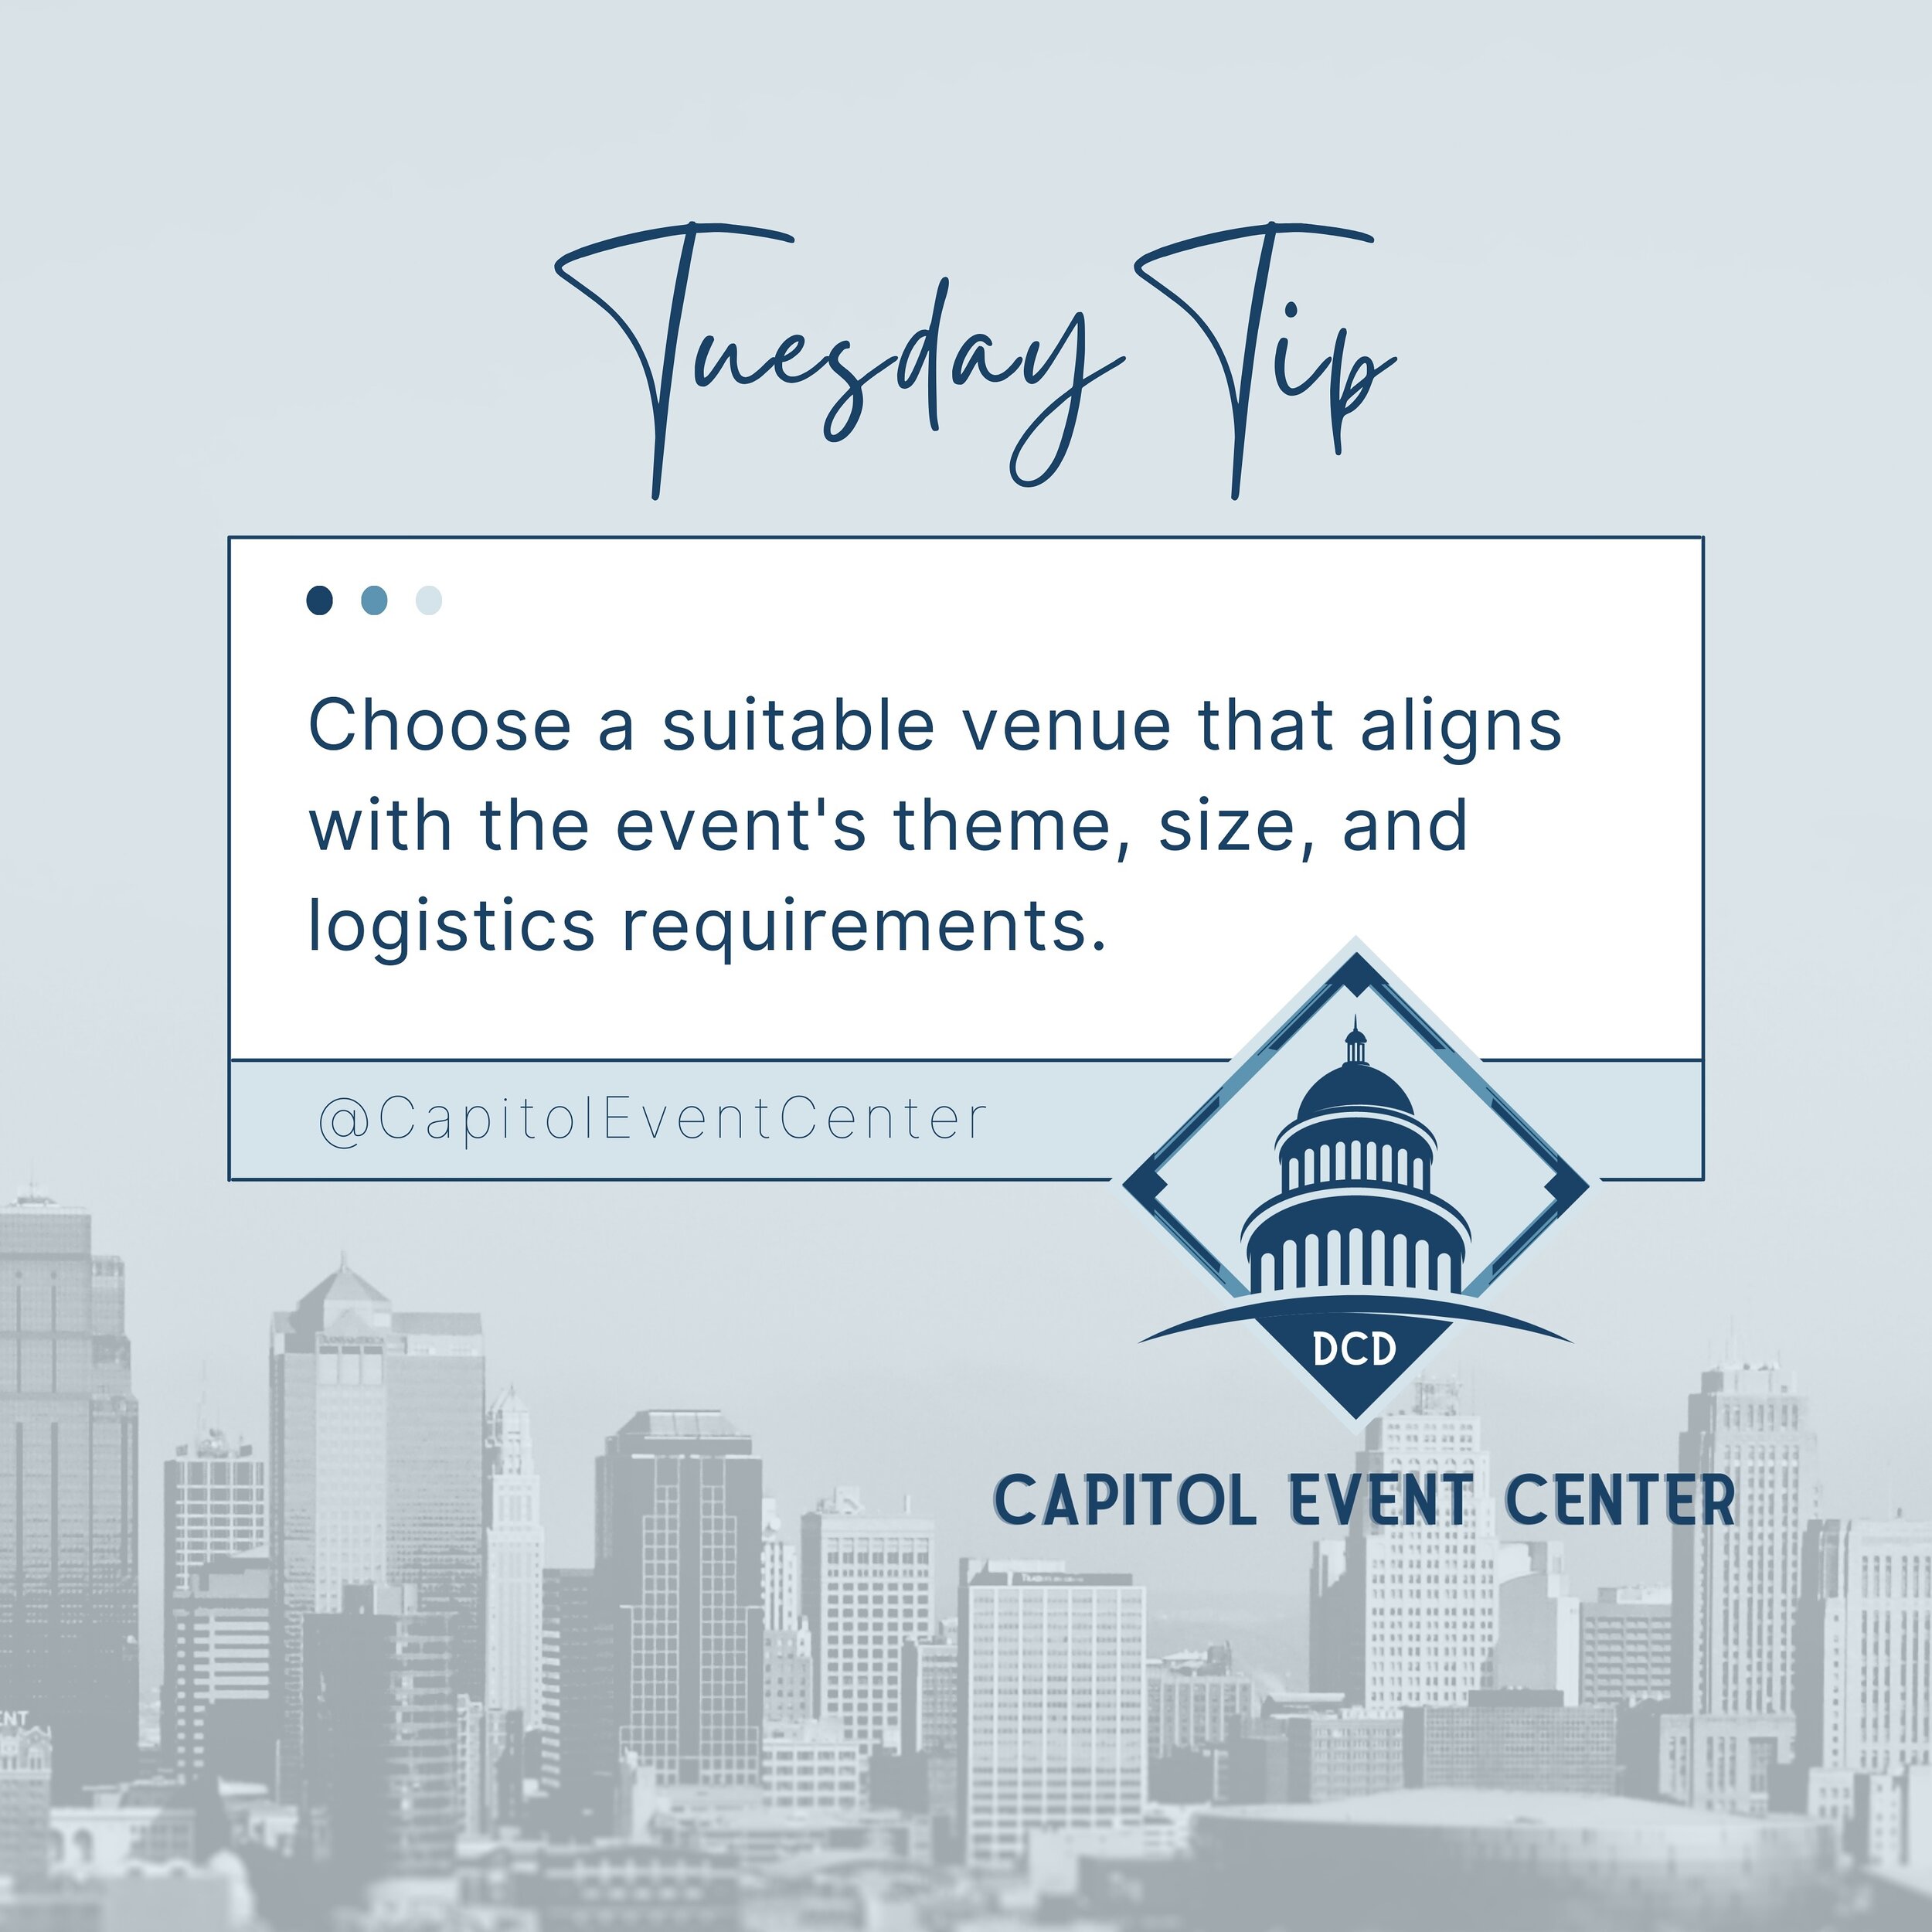 Have you taken a tour yet? Please, schedule a site visit to see if the Capitol Event Center is the perfect venue for you. 

Link in Bio🗓️

#eventplanning #eventplanner #sacramentoevents #conference #meetings #hybridevents #sacramentoweddingvenue #do